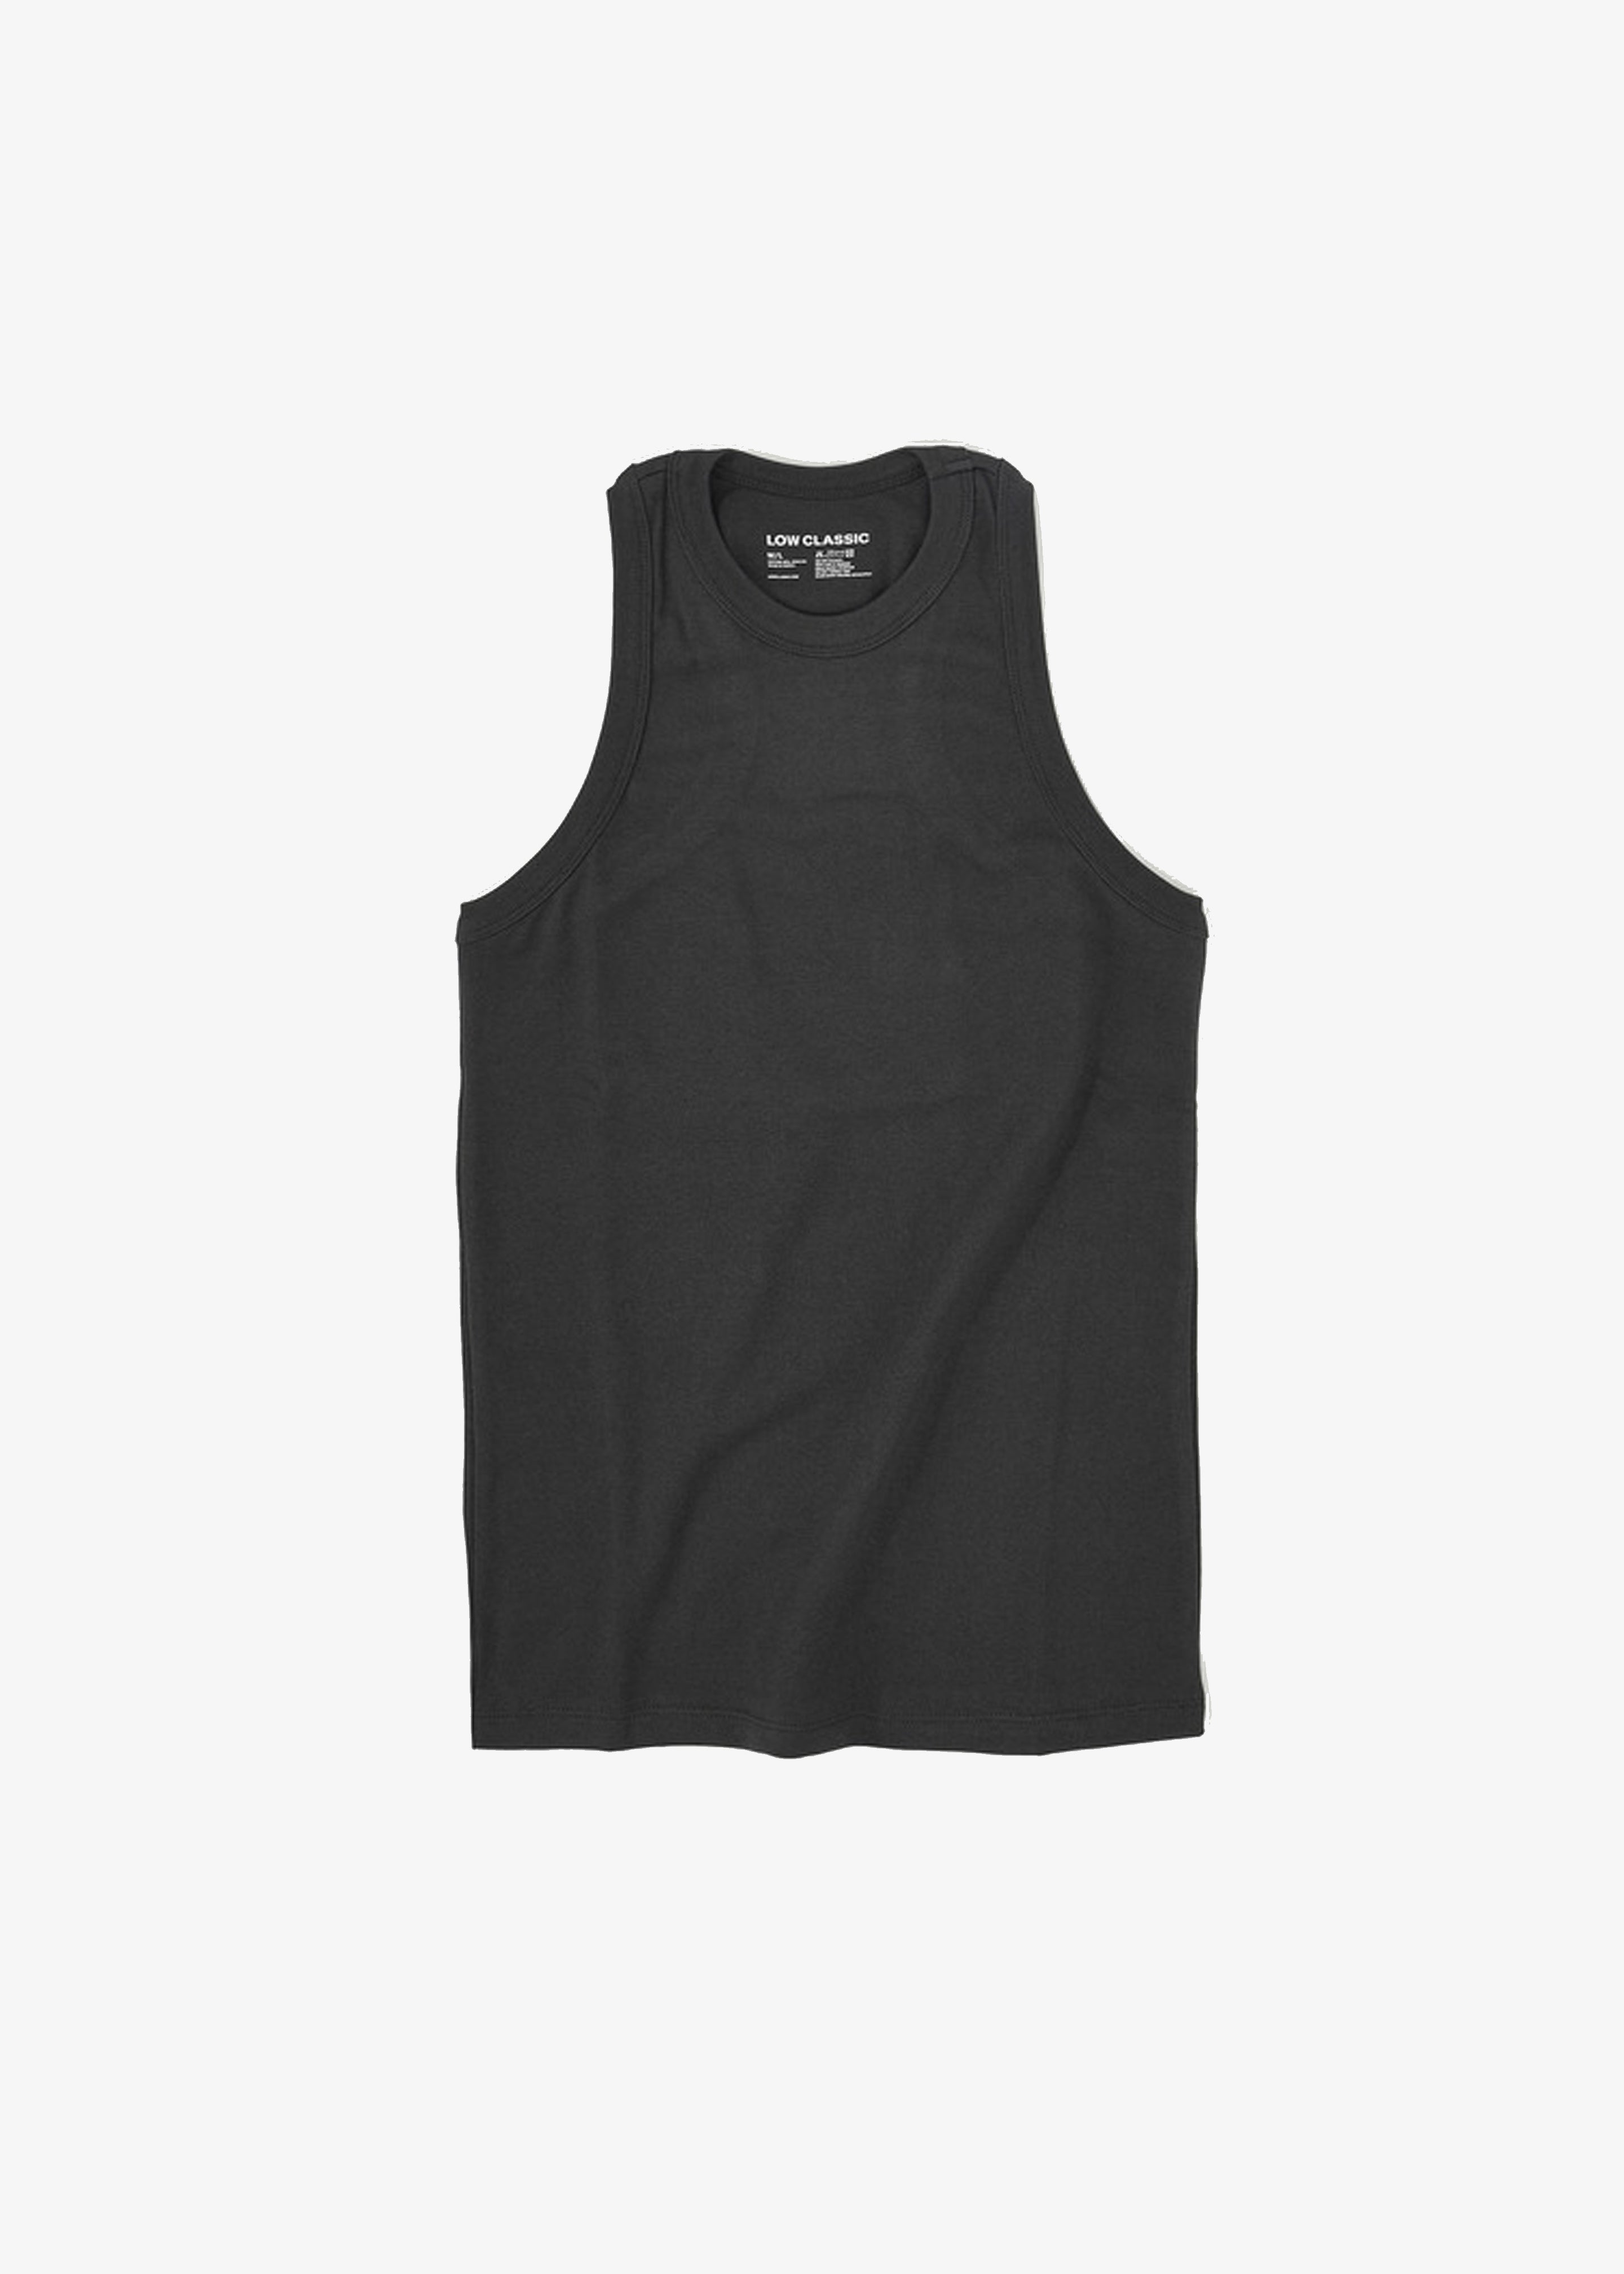 Low Classic Jersey Sleeveless Top - Charcoal - 7